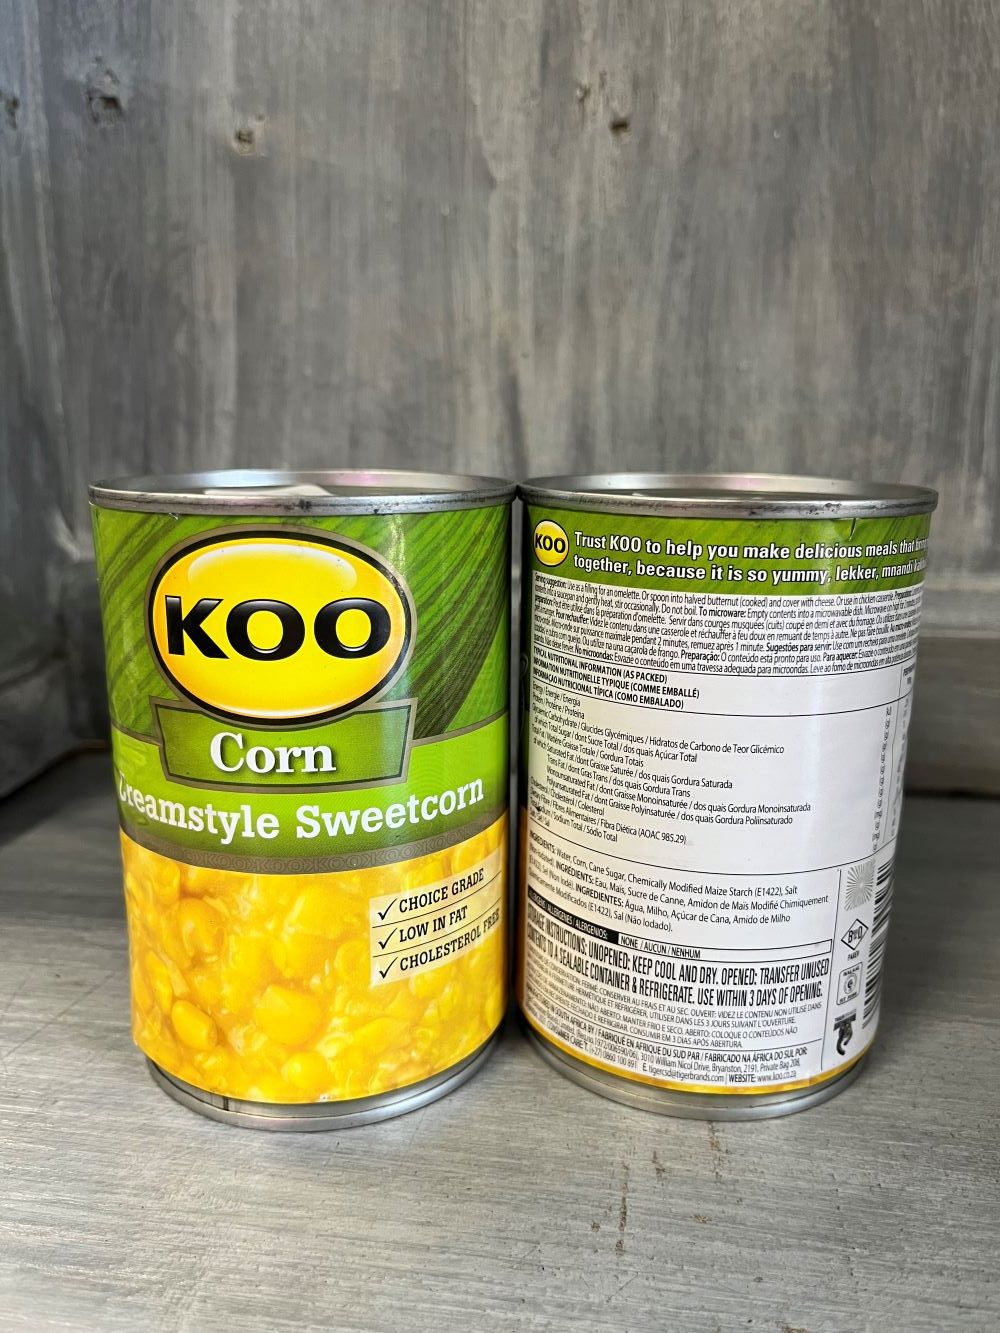 A tin of KOO Cream Style Sweetcorn, showcasing the label with bright yellow corn kernels and a creamy texture, a popular South African tinned product.